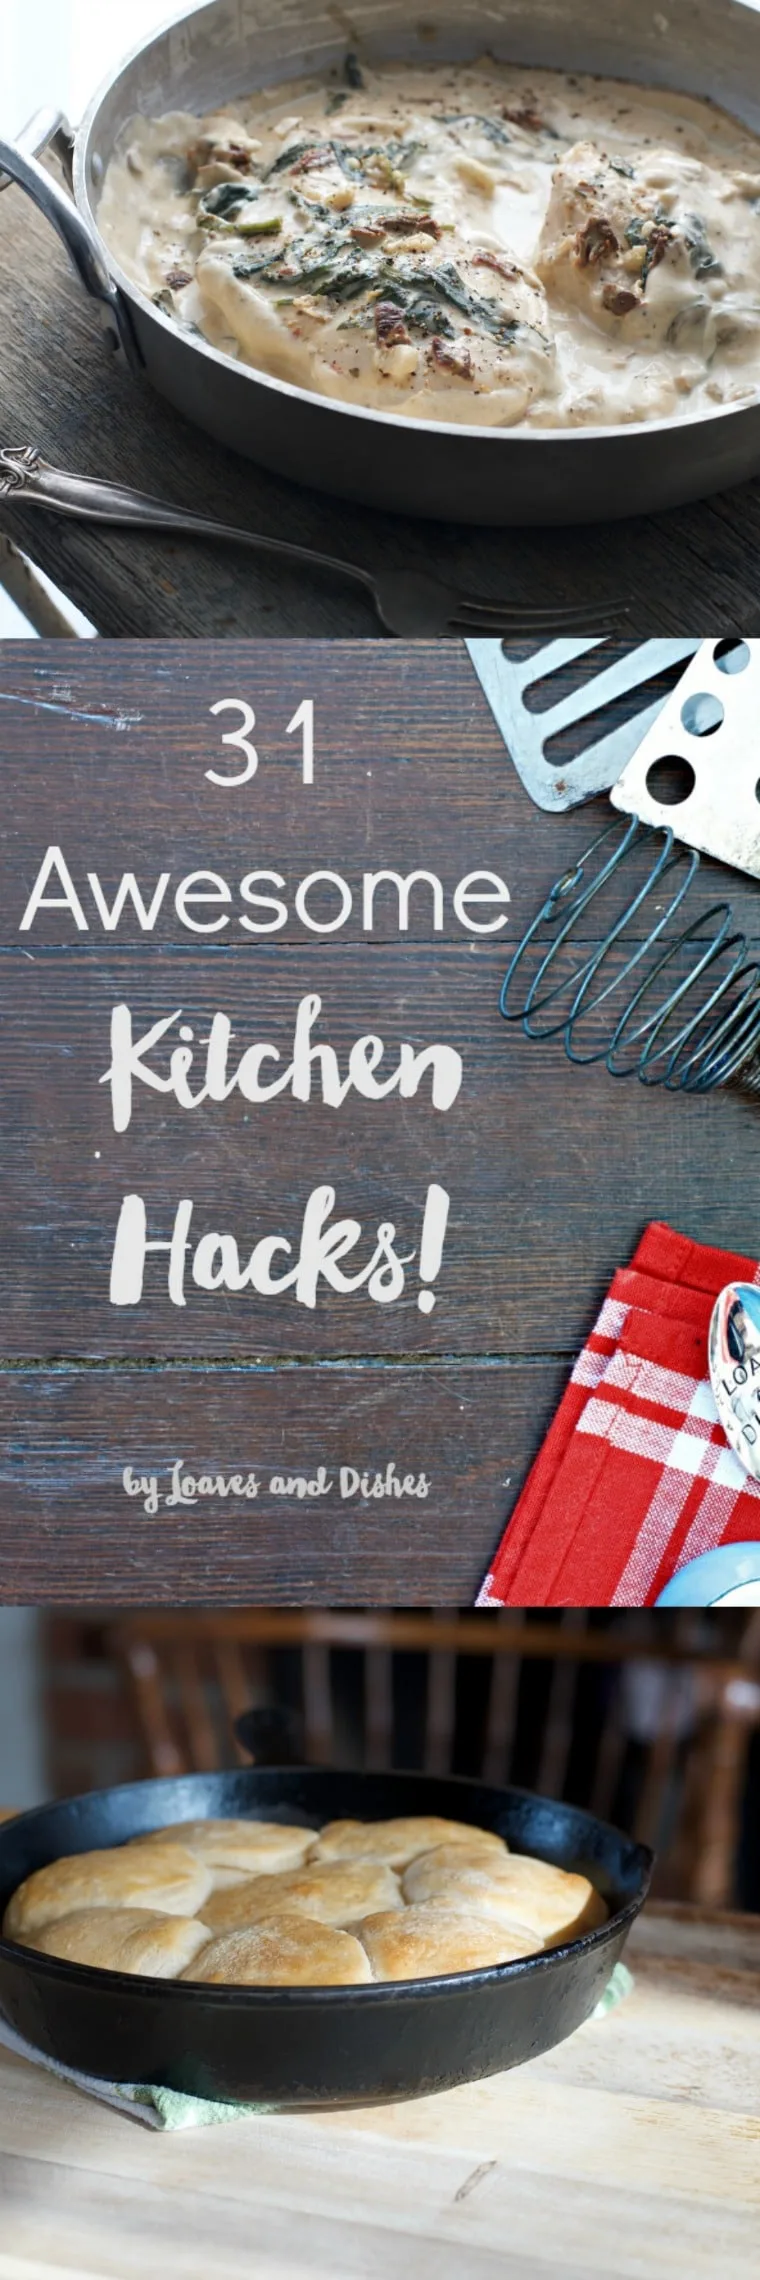 31 Awesome Kitchen Hacks shows you great shortcuts for the kitchen and includes a free printable. Quick video as well to cover the basics.